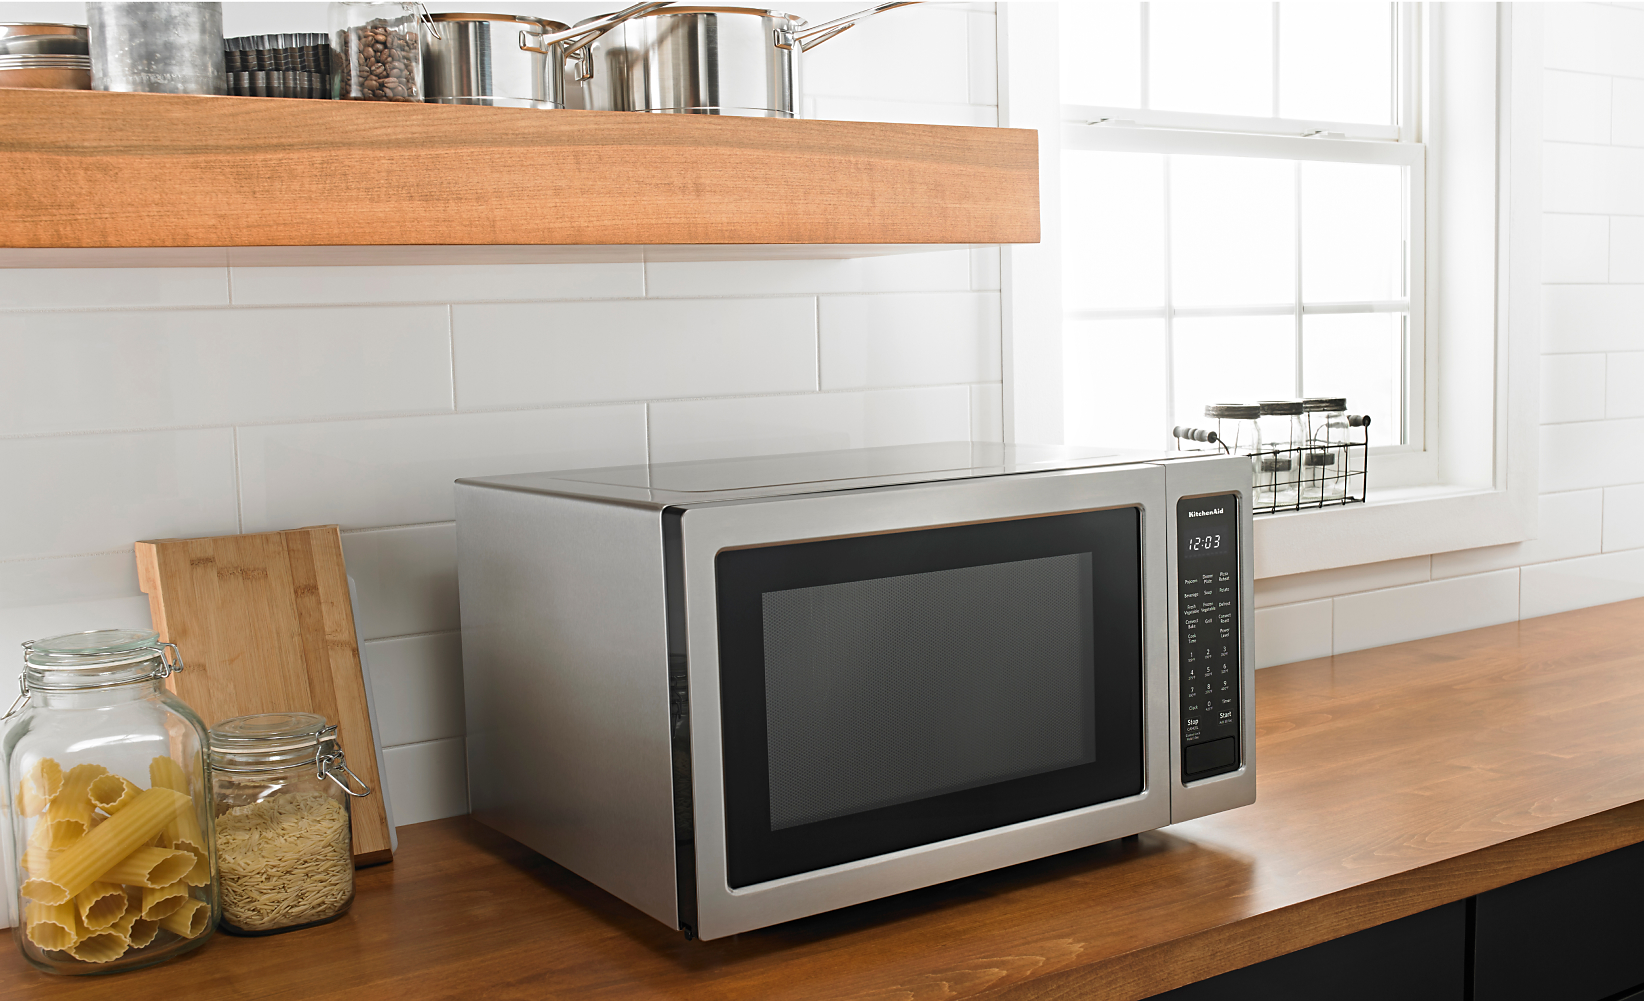 A countertop microwave resting on top of a wood counter.